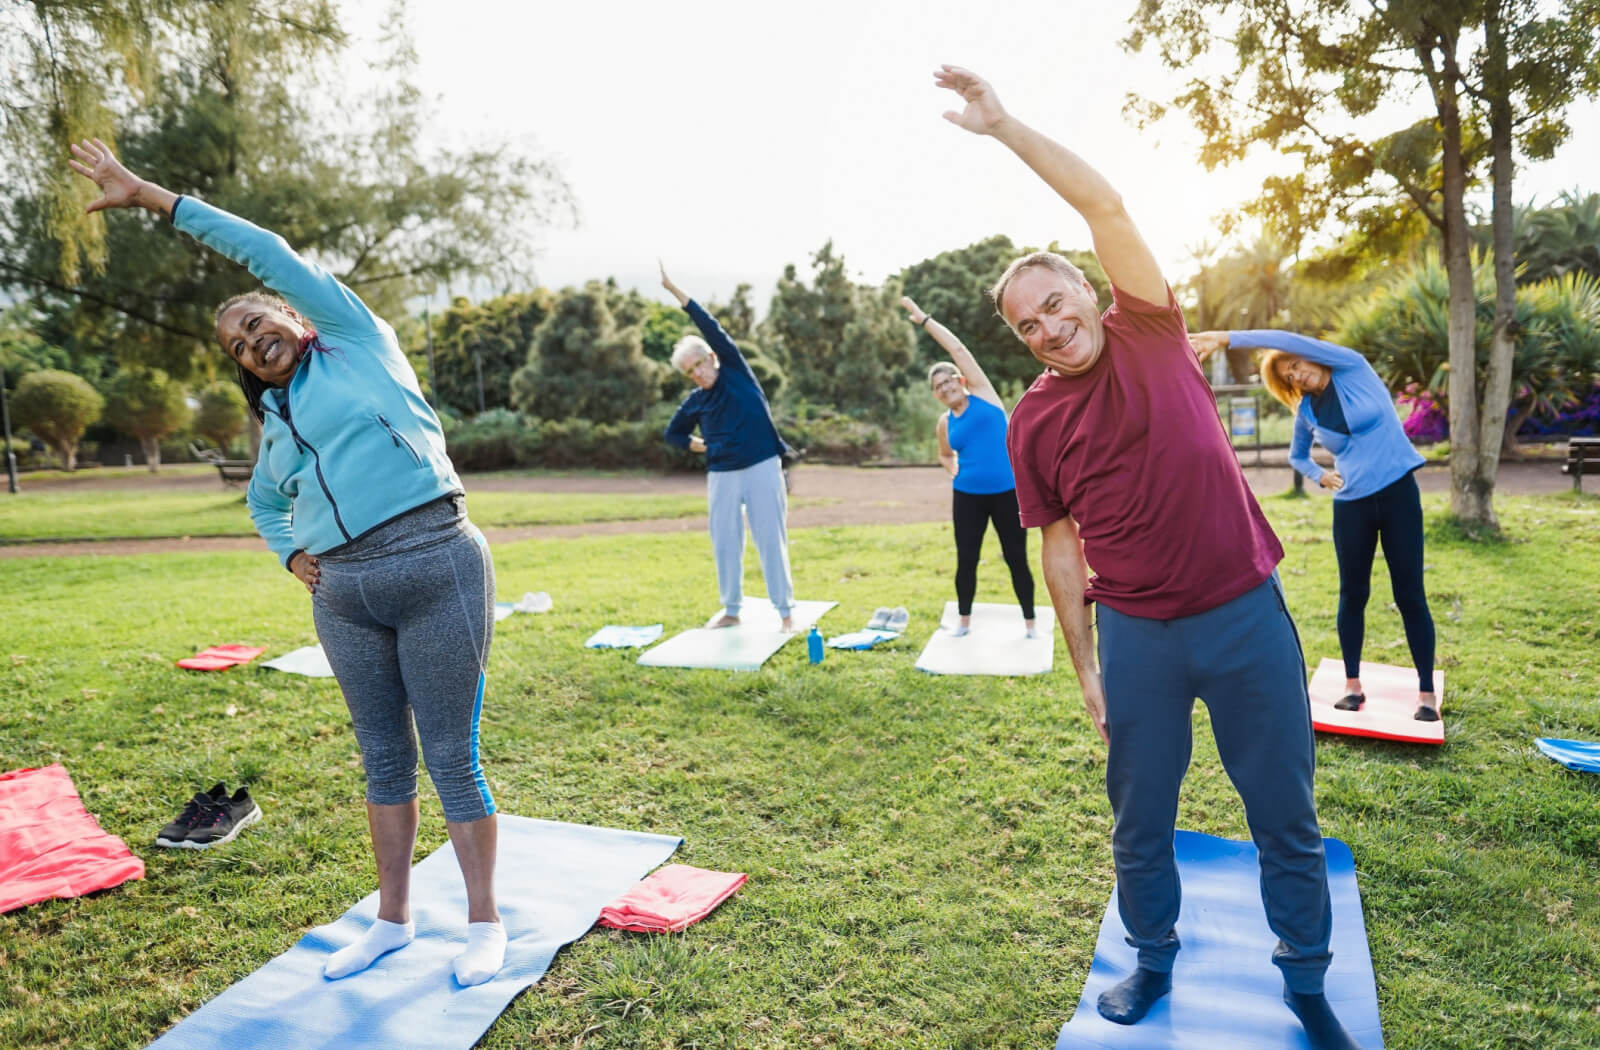 A group of active seniors stretching outdoors.